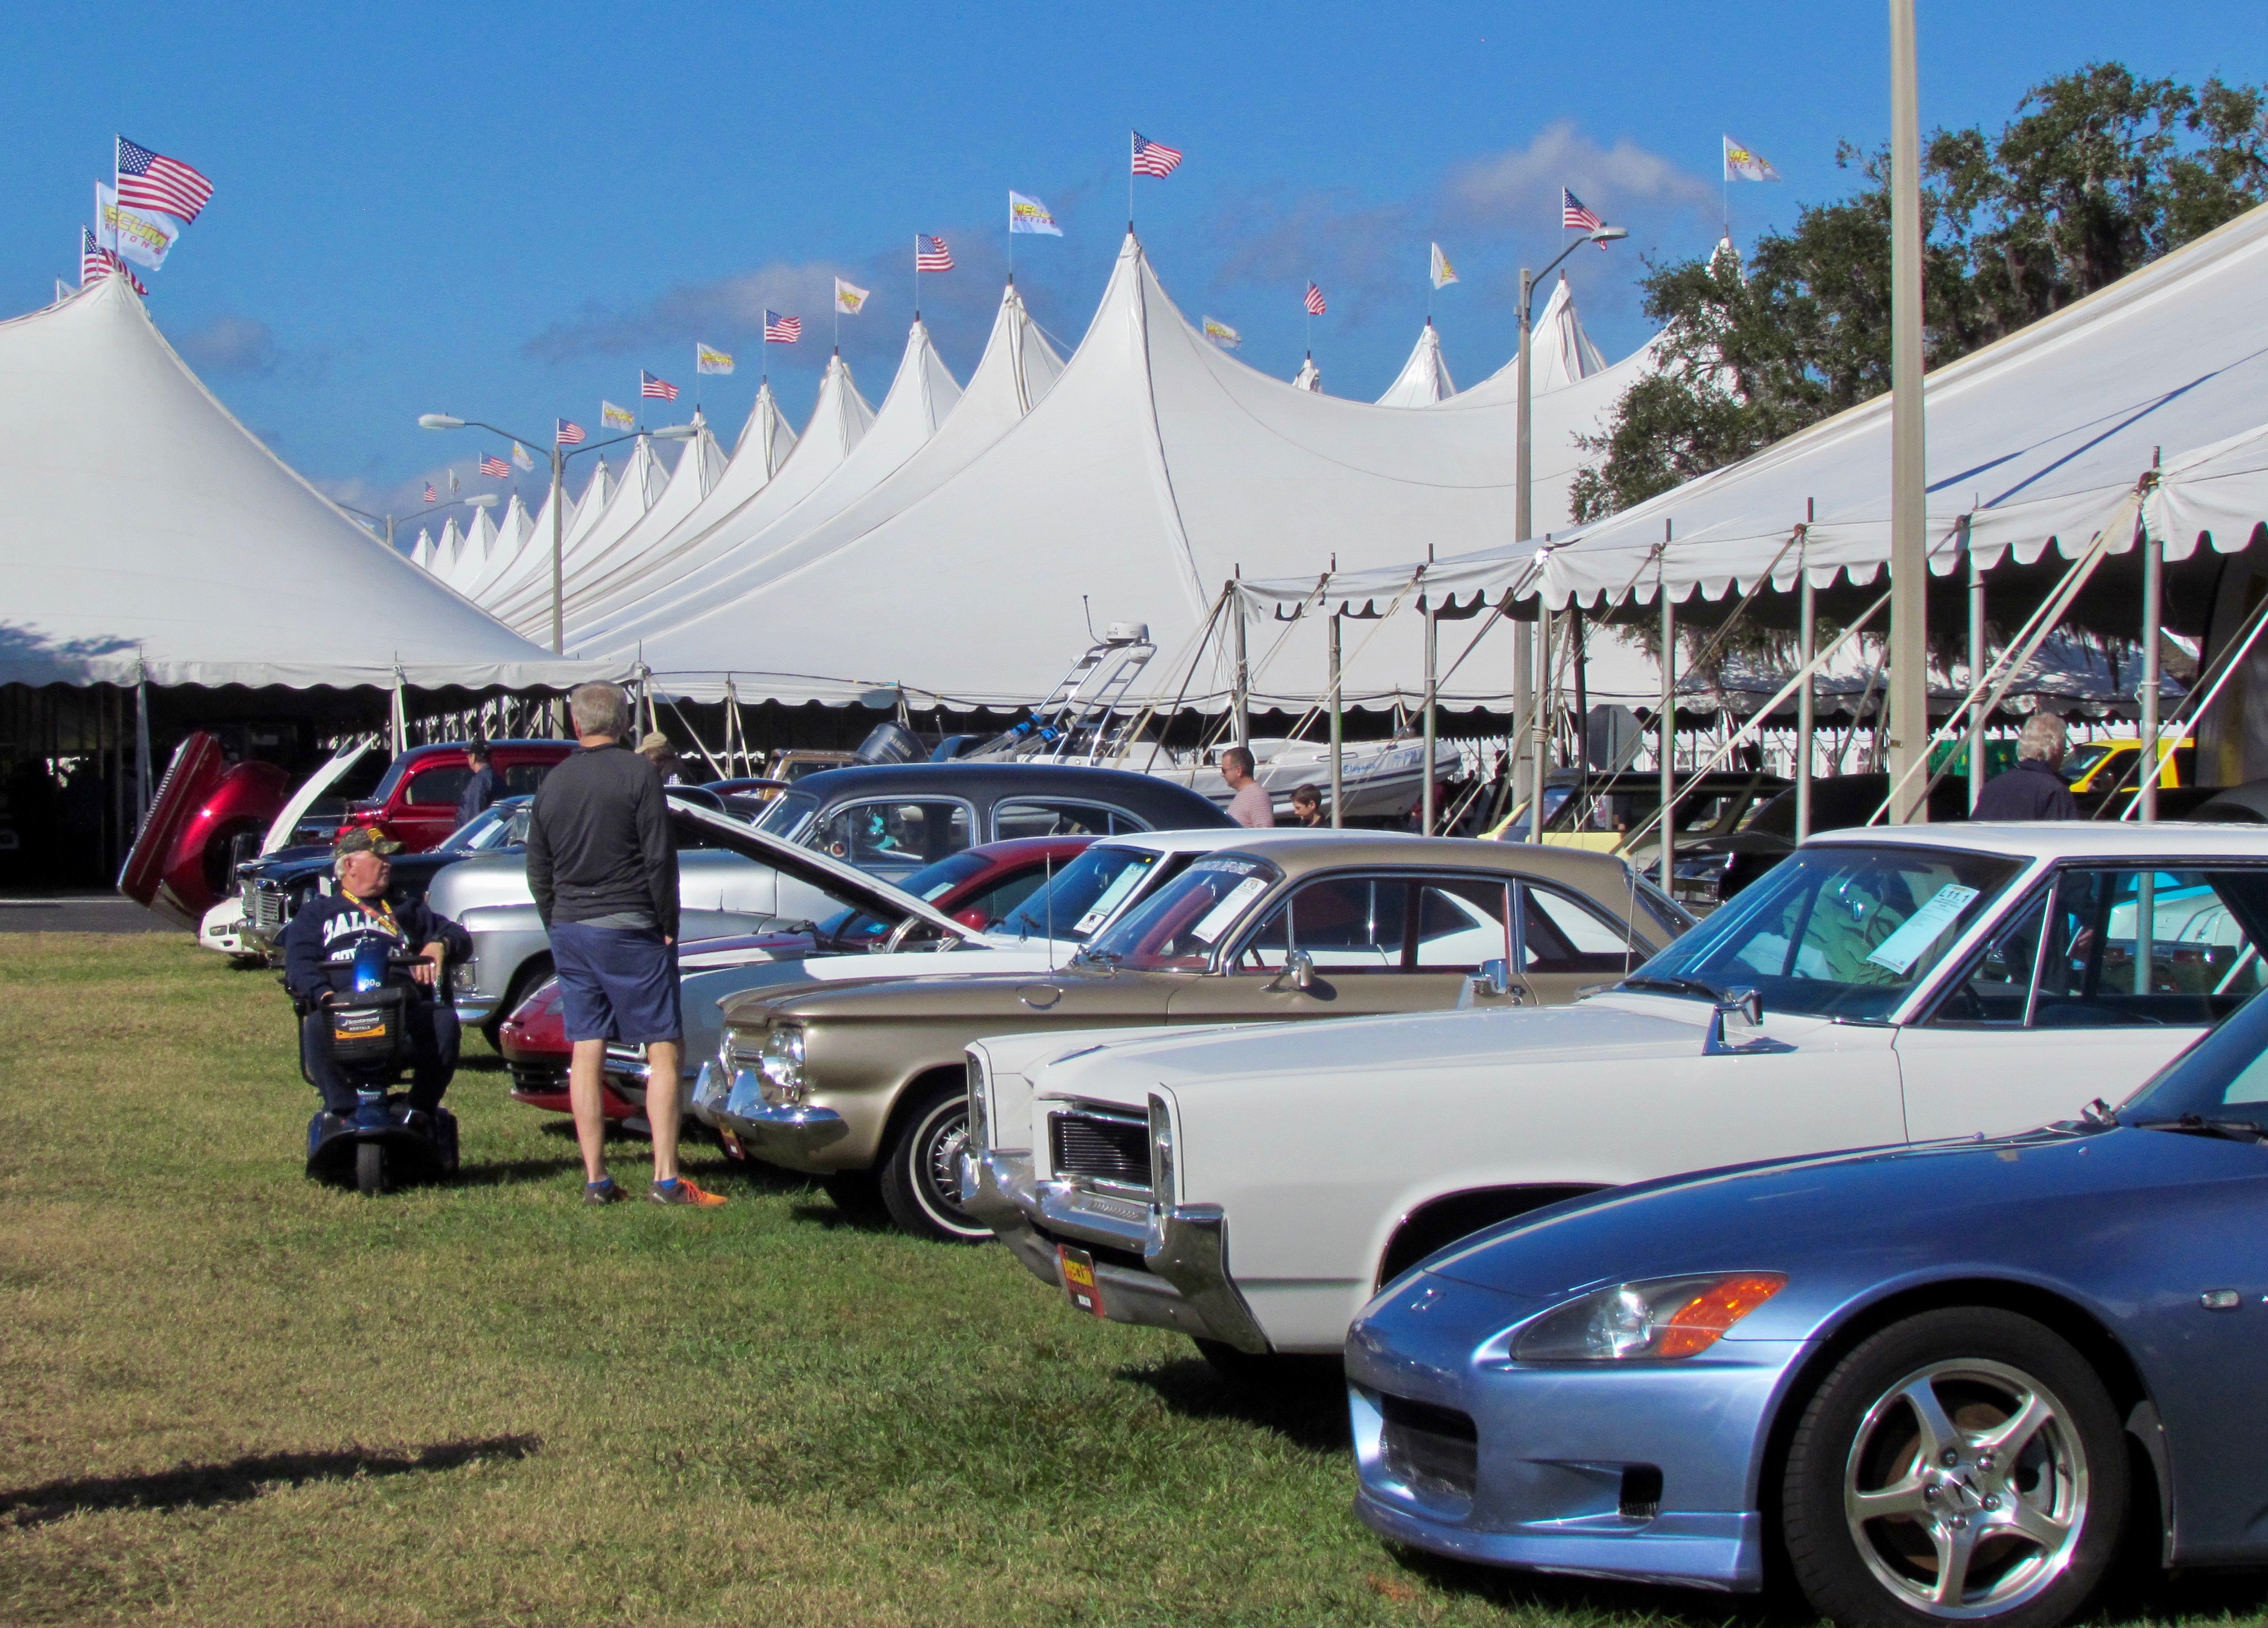 larry s likes among affordable cars at mecum s kissimmee sale larry s likes among affordable cars